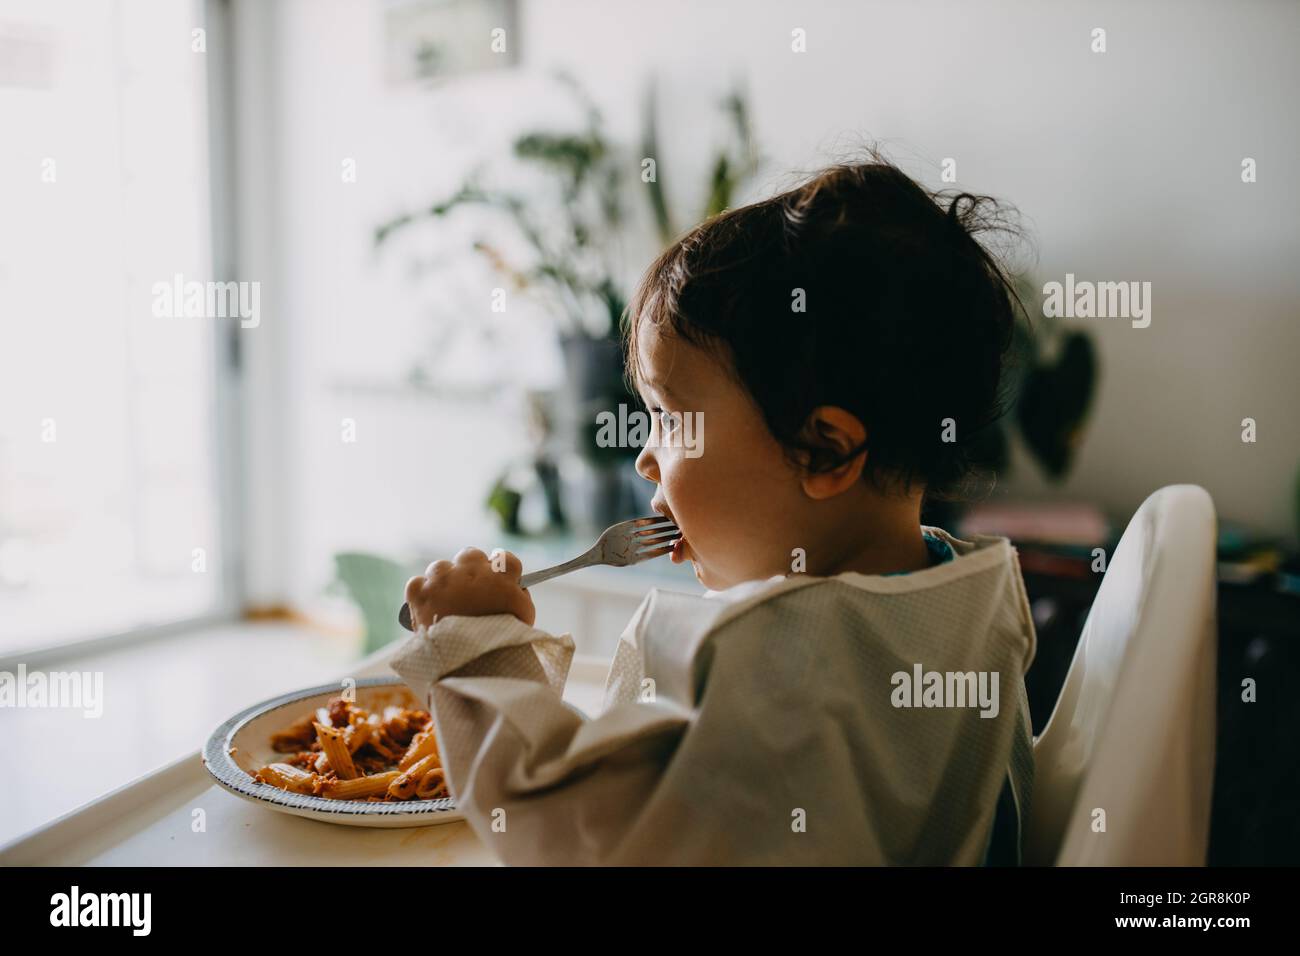 Boy Looking Away While Sitting On Table Stock Photo